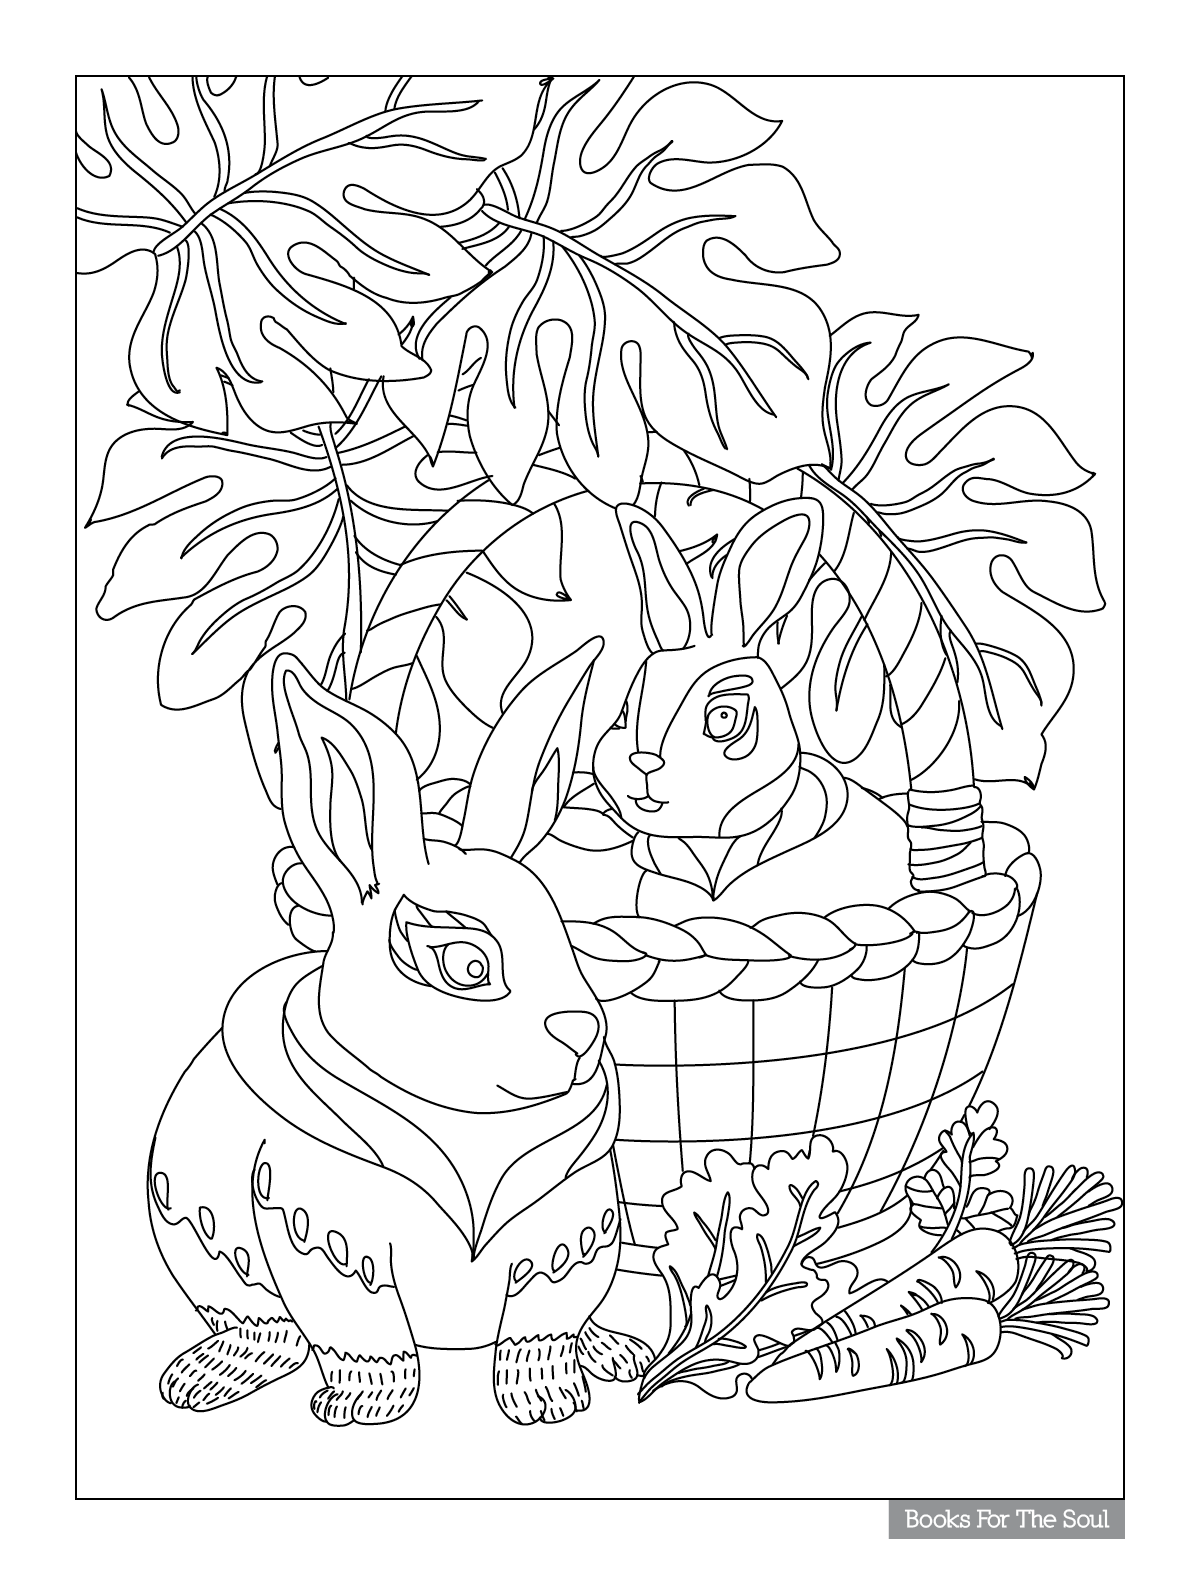 Flora　Lazada　PH　and　Adults　Book　Fauna　Coloring　for